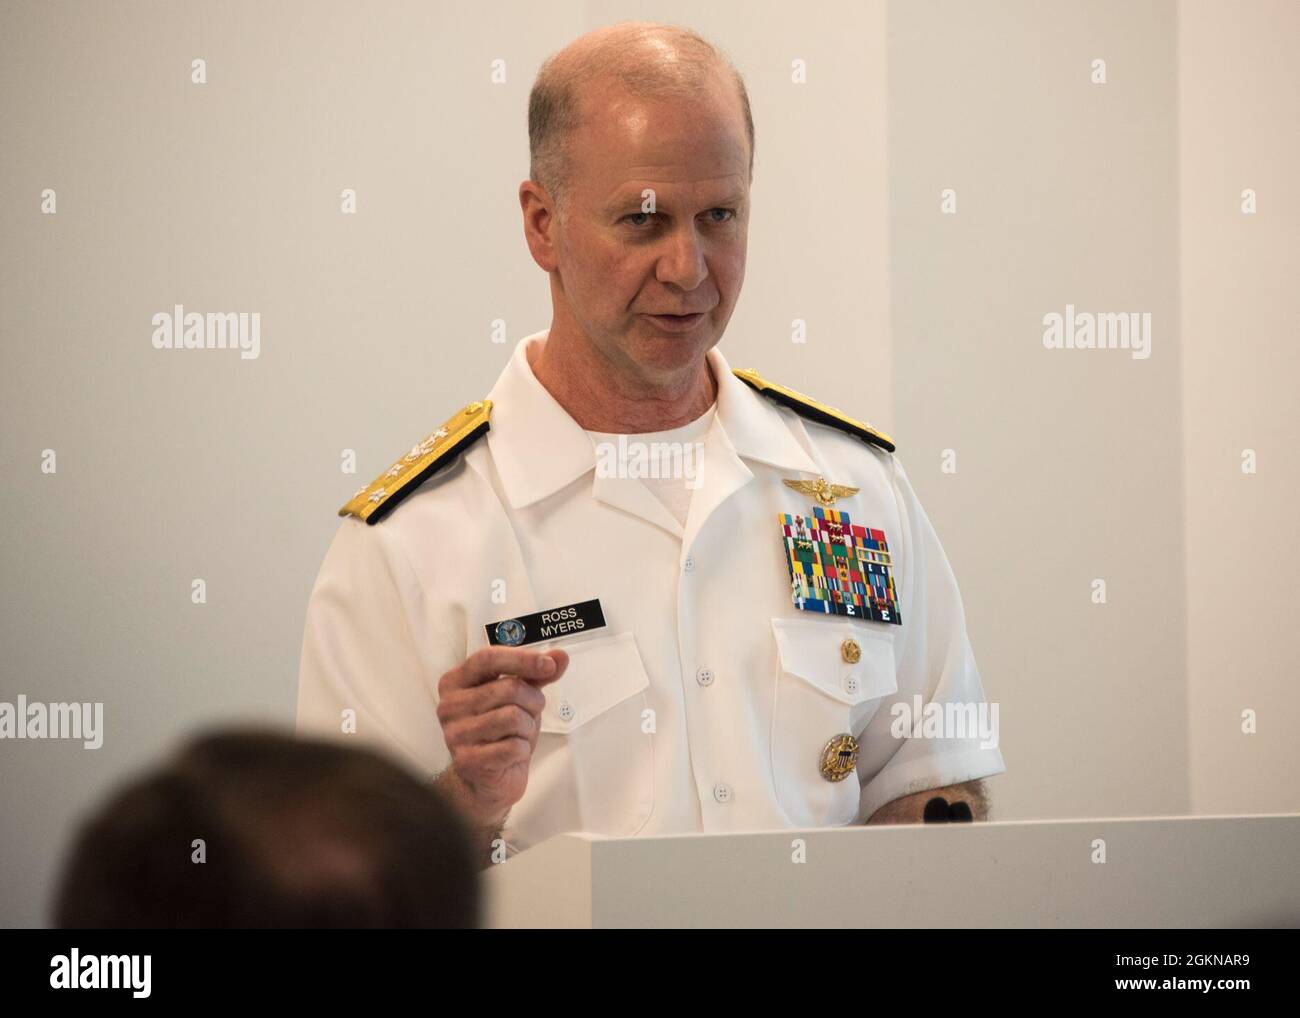 210604-N-XK809-0098 FORT GEORGE G. MEADE, Md. (June 04, 2021) Vice Adm. Ross Myers, Commander, Fleet Cyber Command/Commander, TENTH Fleet speaks during the 79th Battle of Midway Commemoration held by CWG-6. This is the first event held in person since the COVID-19 pandemic began. CWG-6 delivers information warfare capabilities to the U.S. Navy to conduct signals intelligence and cyberspace operations for naval and joint forces. Stock Photo